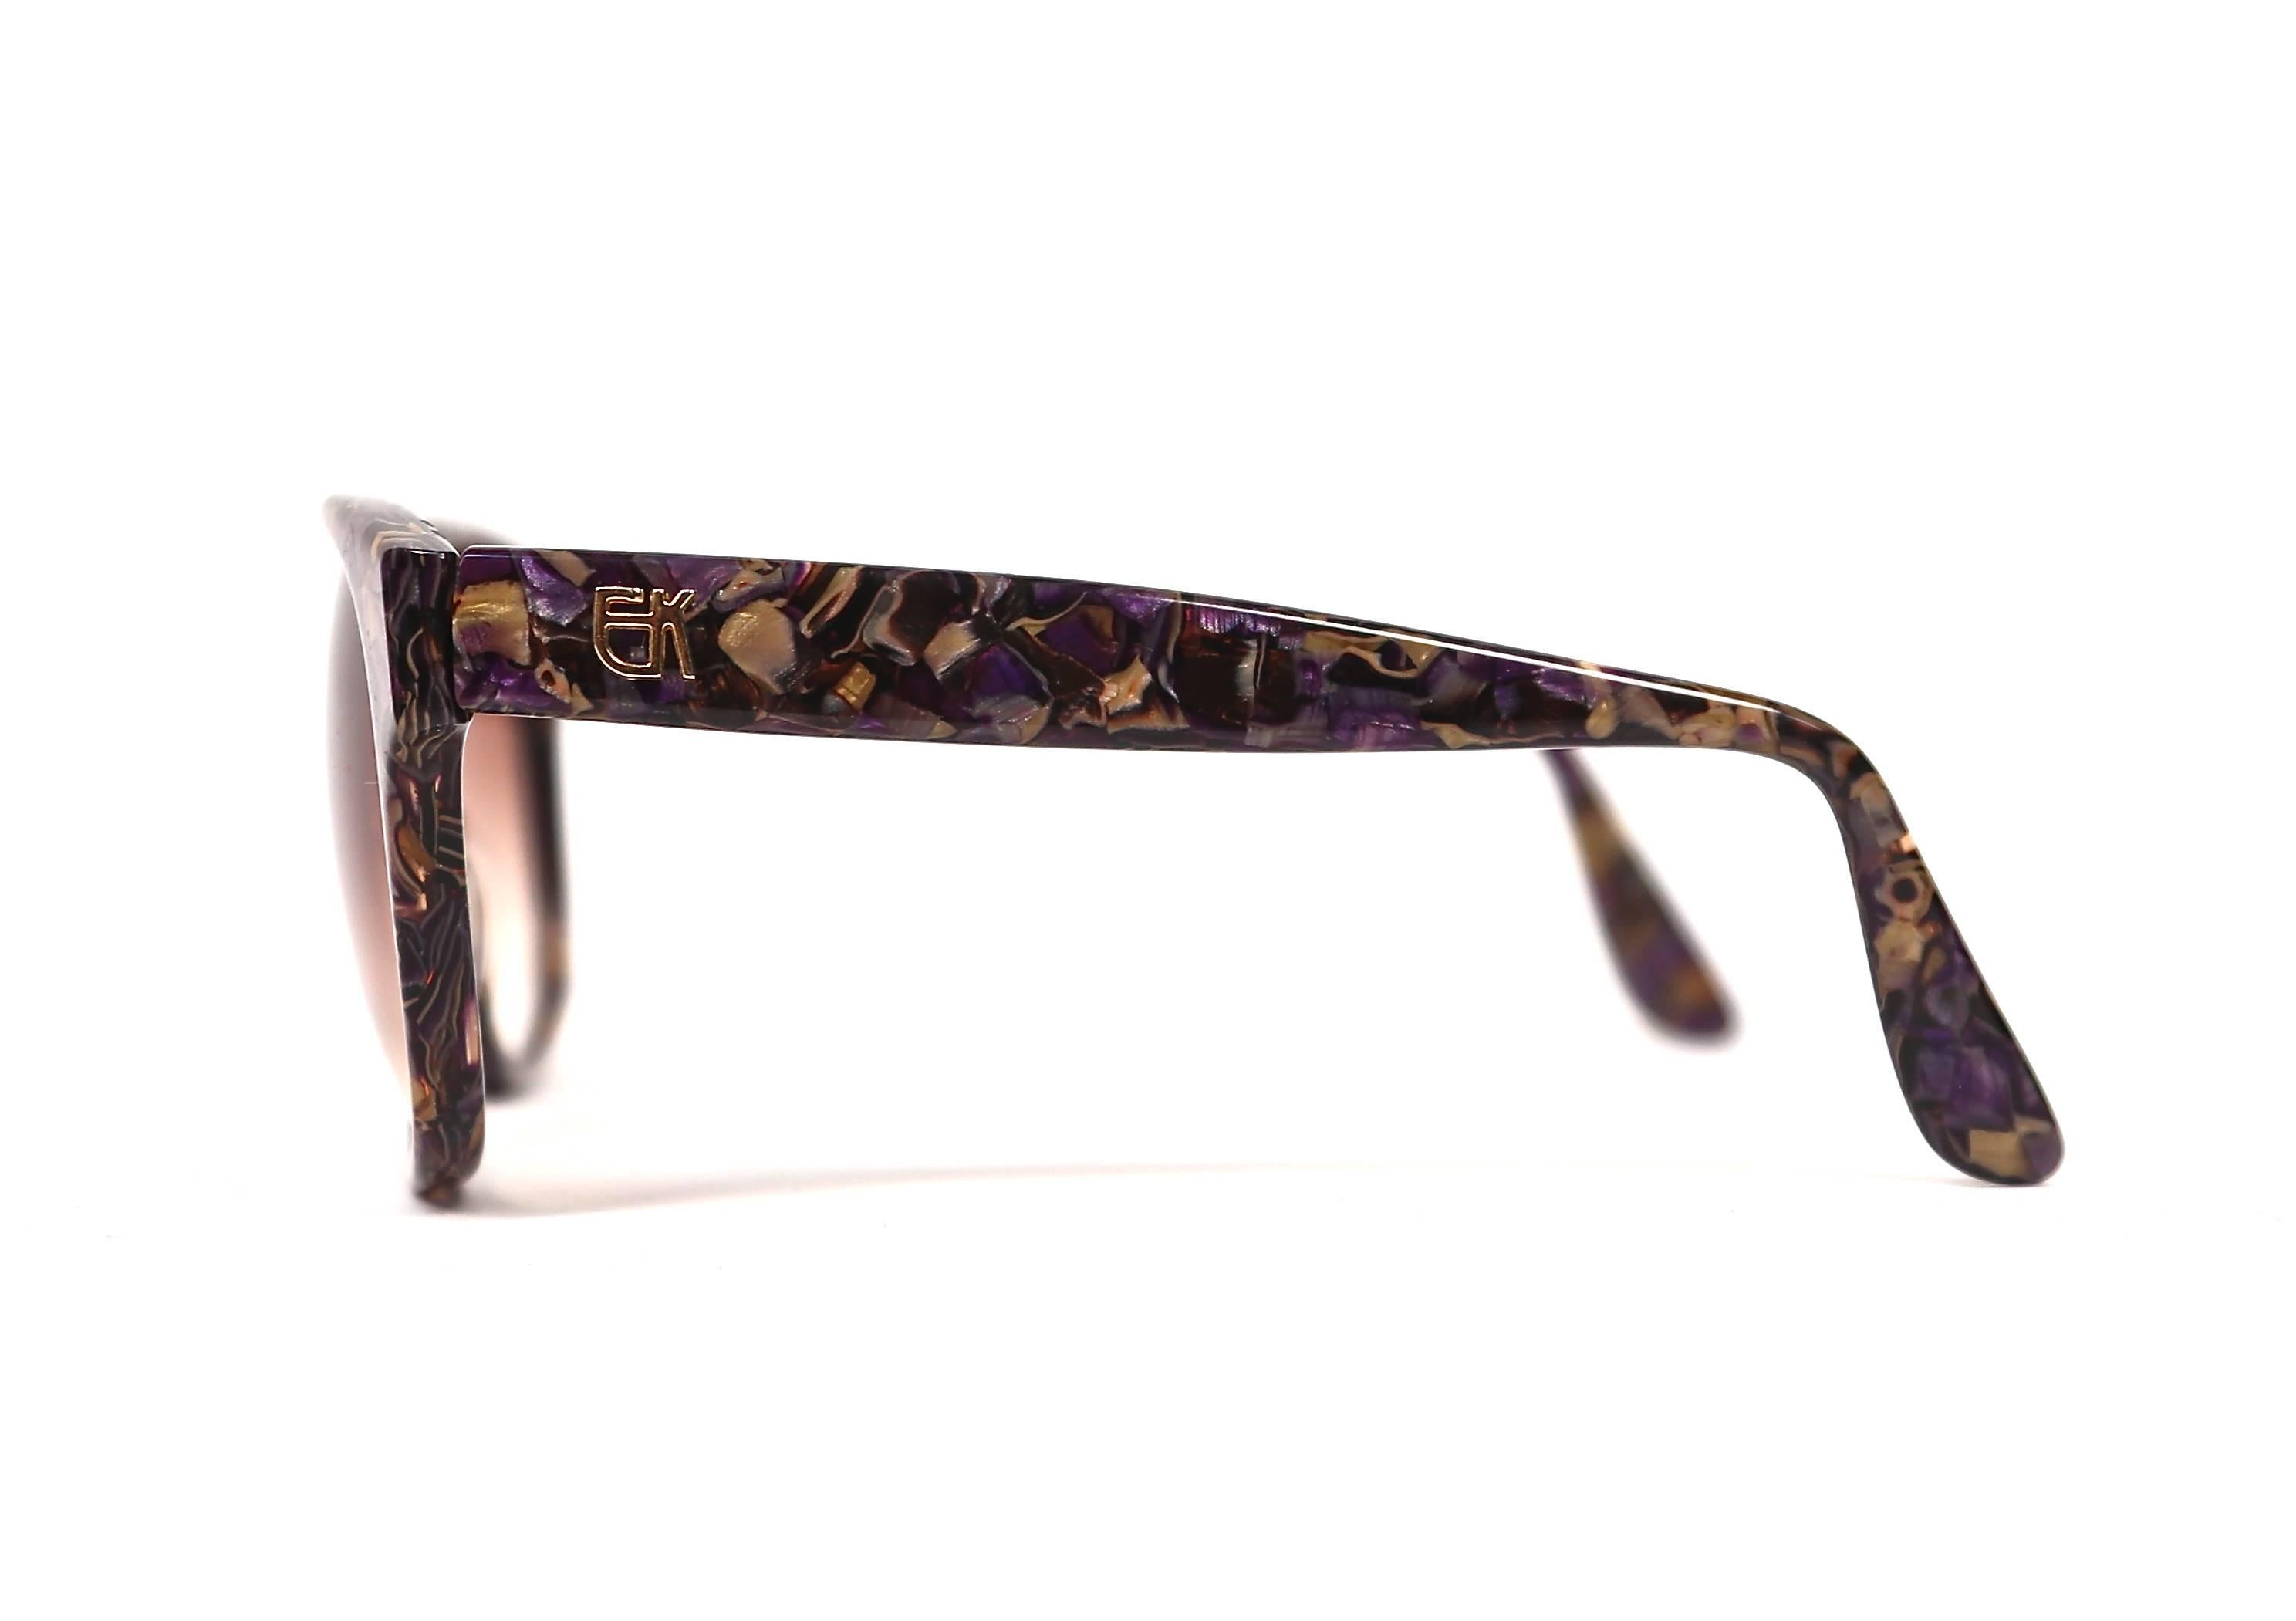 Vivid purple and gold mosaic sunglasses with gilt EK logo at temples from Emmanuelle Khanh dating to the late 1970's. Oversized frames are great fort a medium or larger sized face. Approximate measurements: 155 mm from temple to temple, 58 mm from